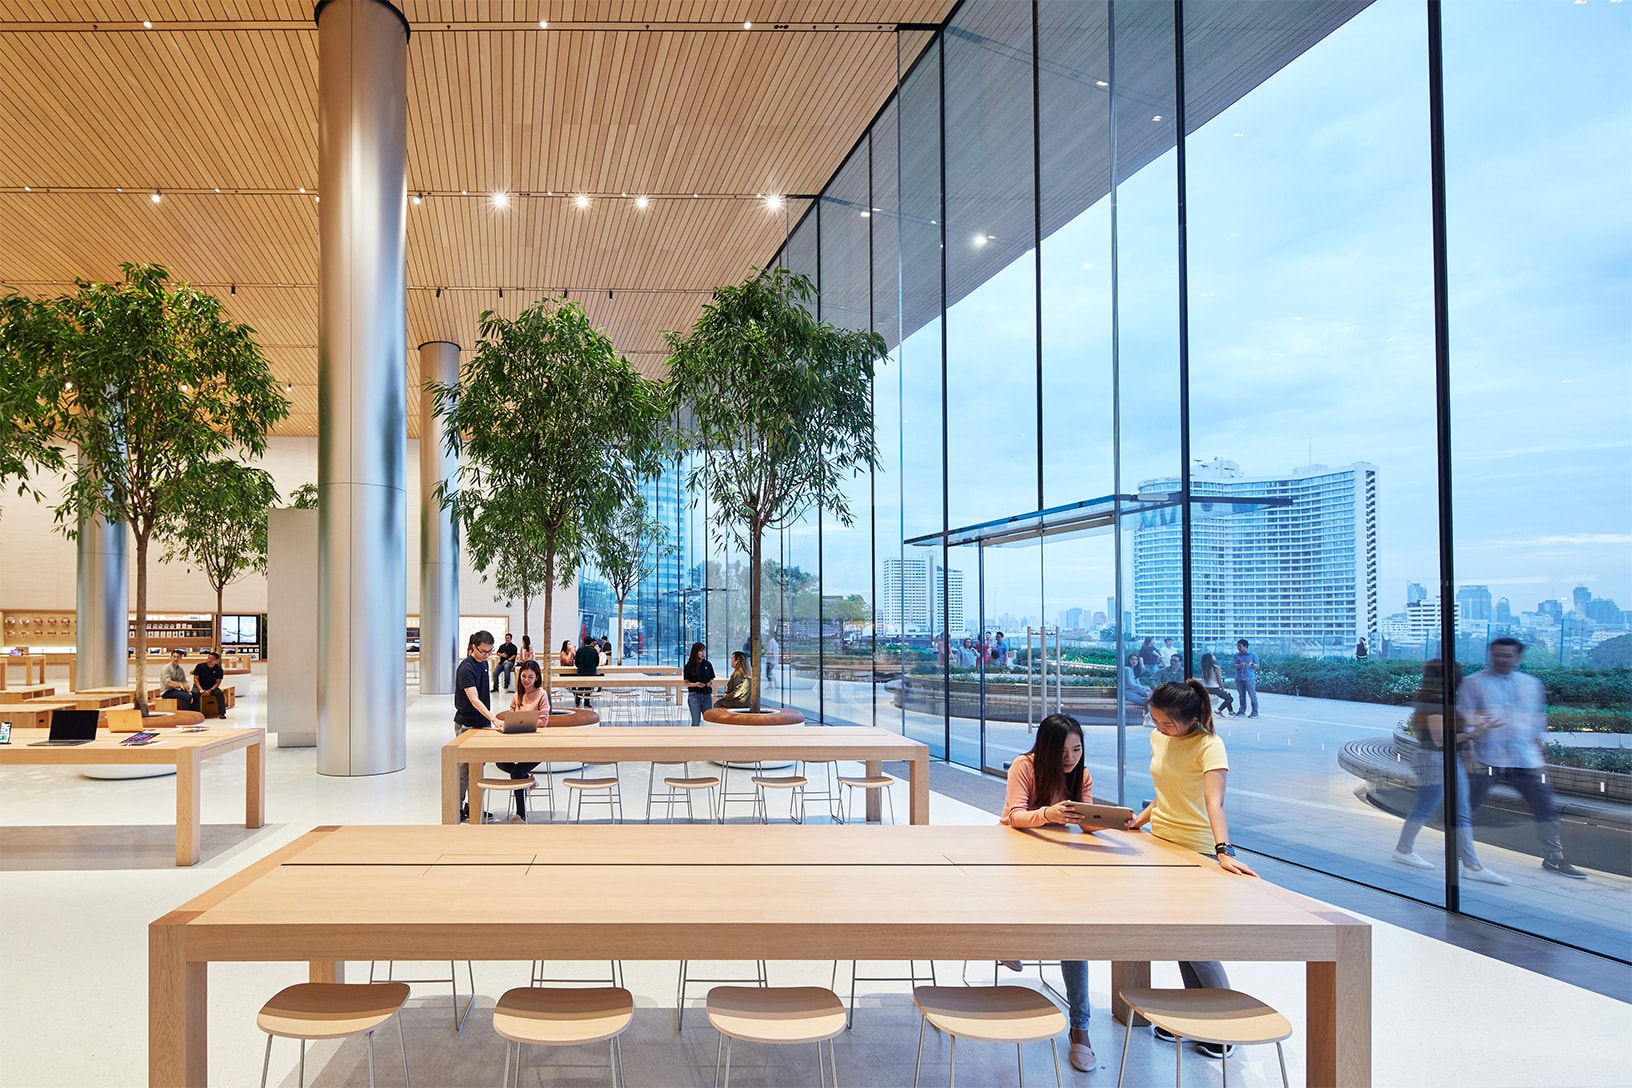 Apple store likely to go without rooftop logo